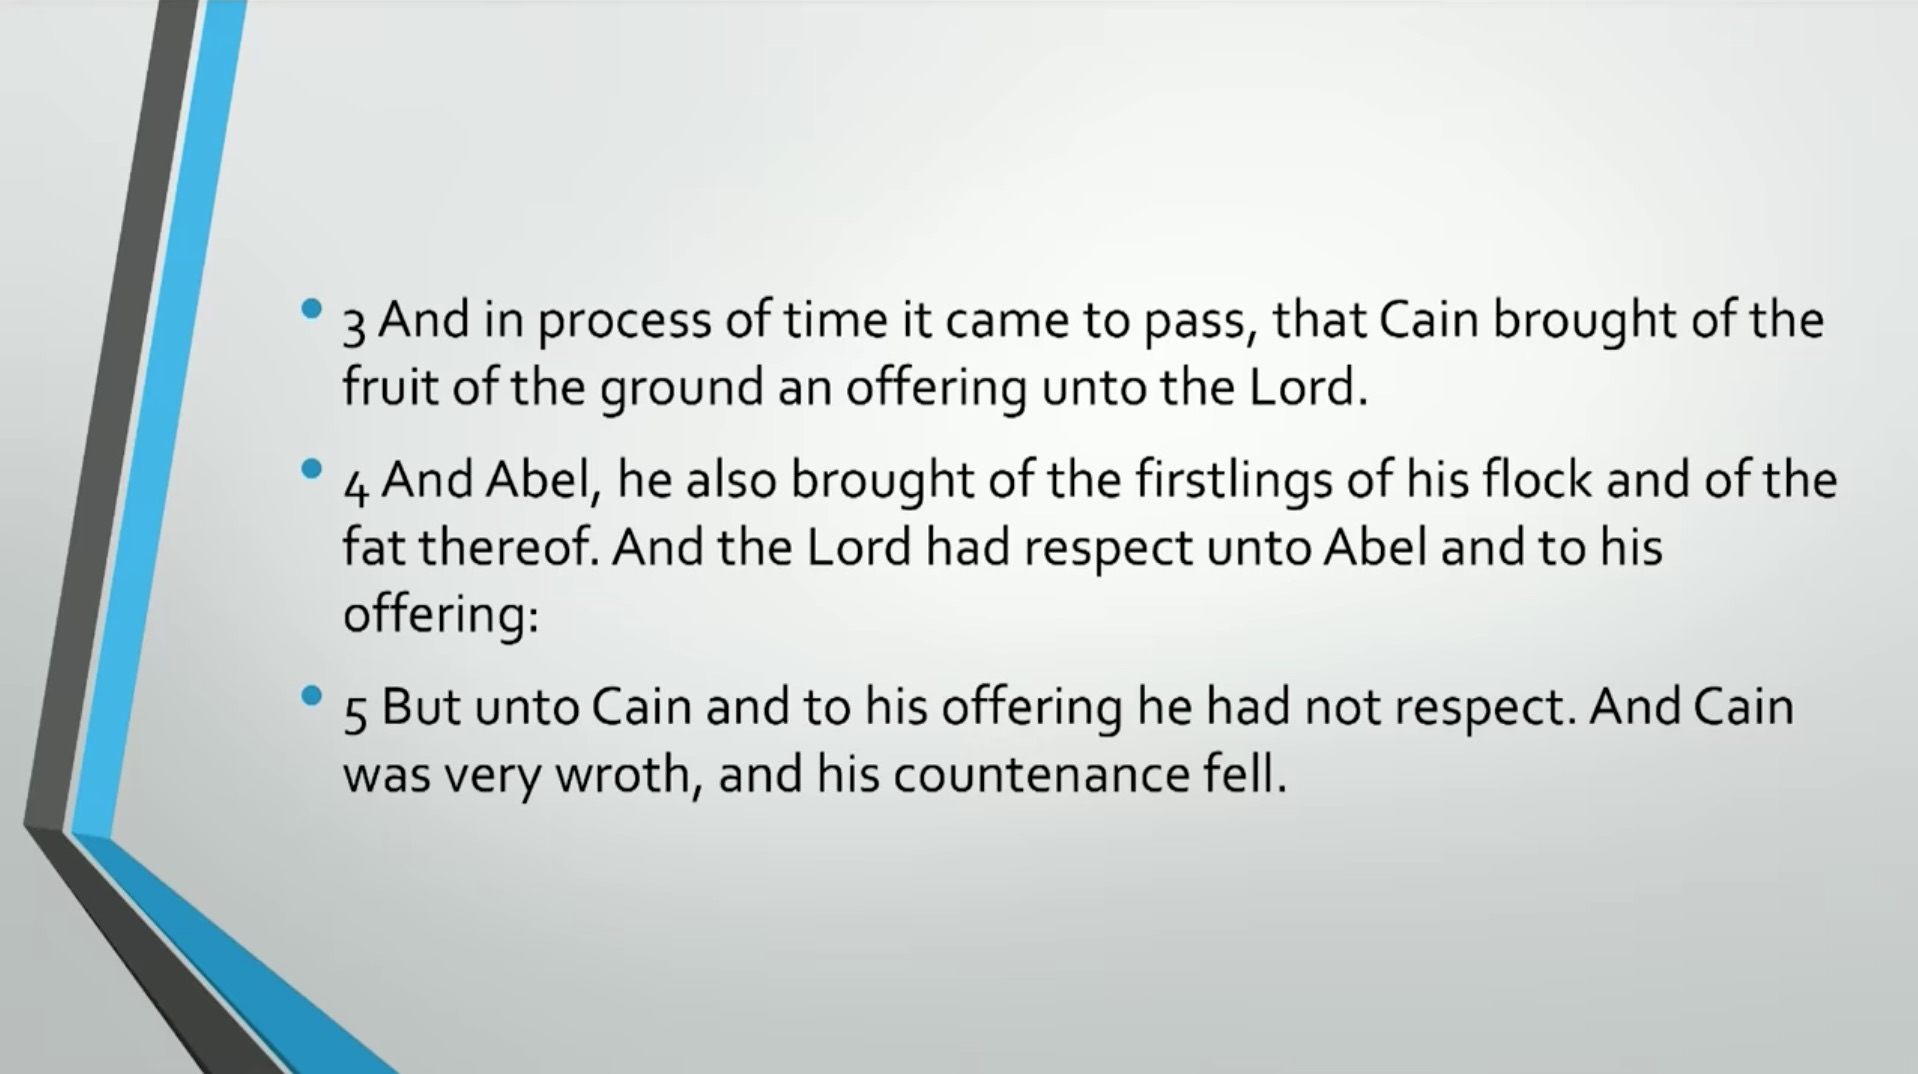 what may the mention of the cain and abel story in the quote in the second paragraph foreshadow?